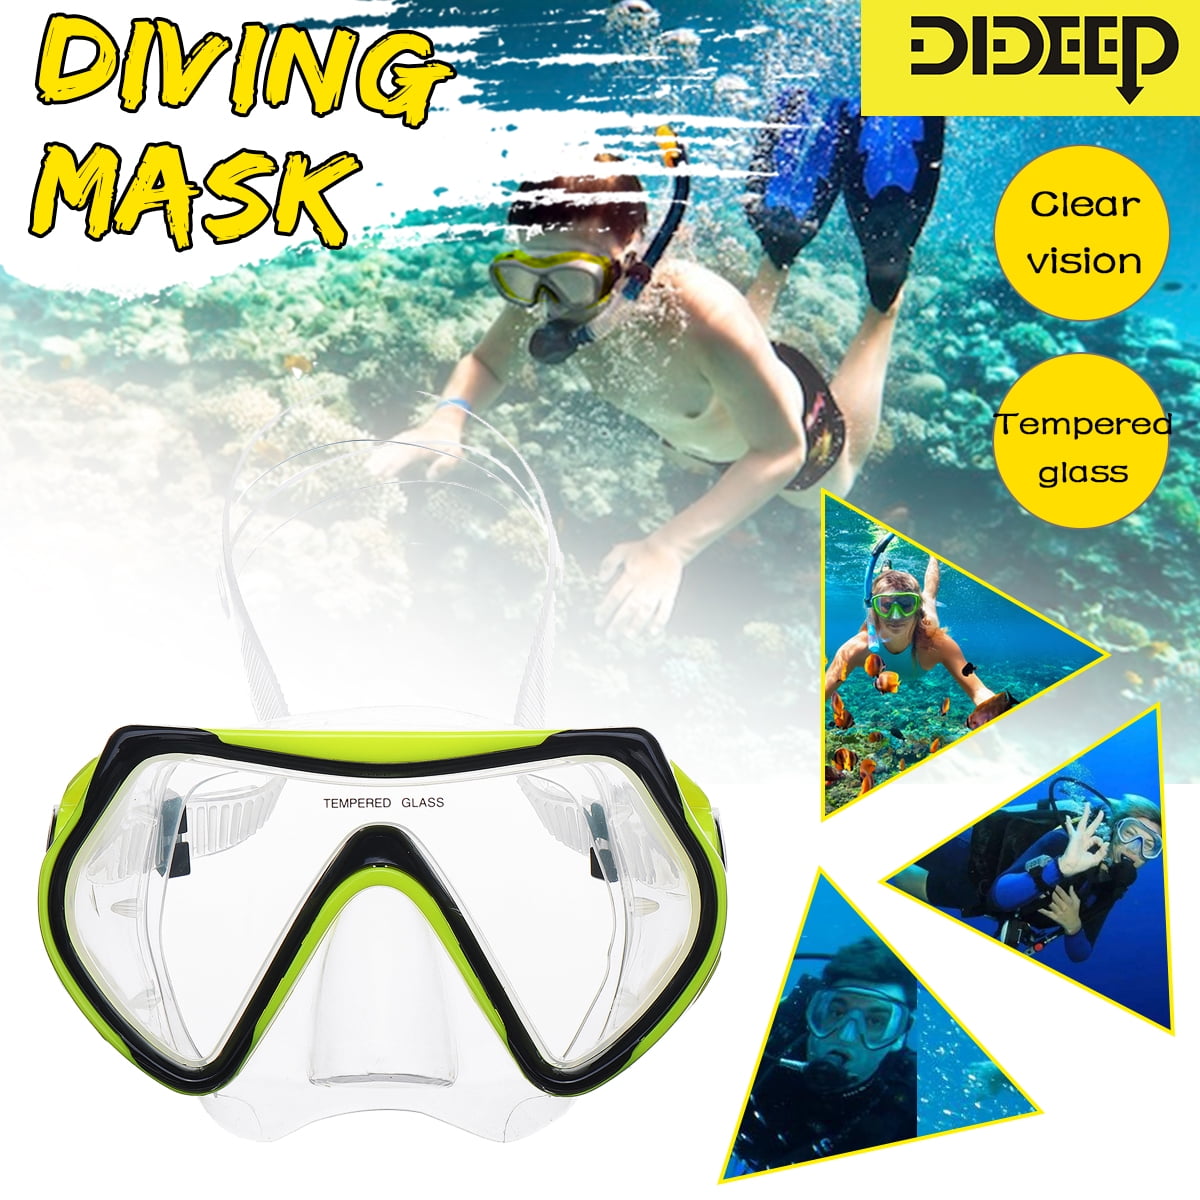 Details about    DIDEEP Diving Scuba Mask Goggles Glass Lens Swimming Underwater Accessory Adult 